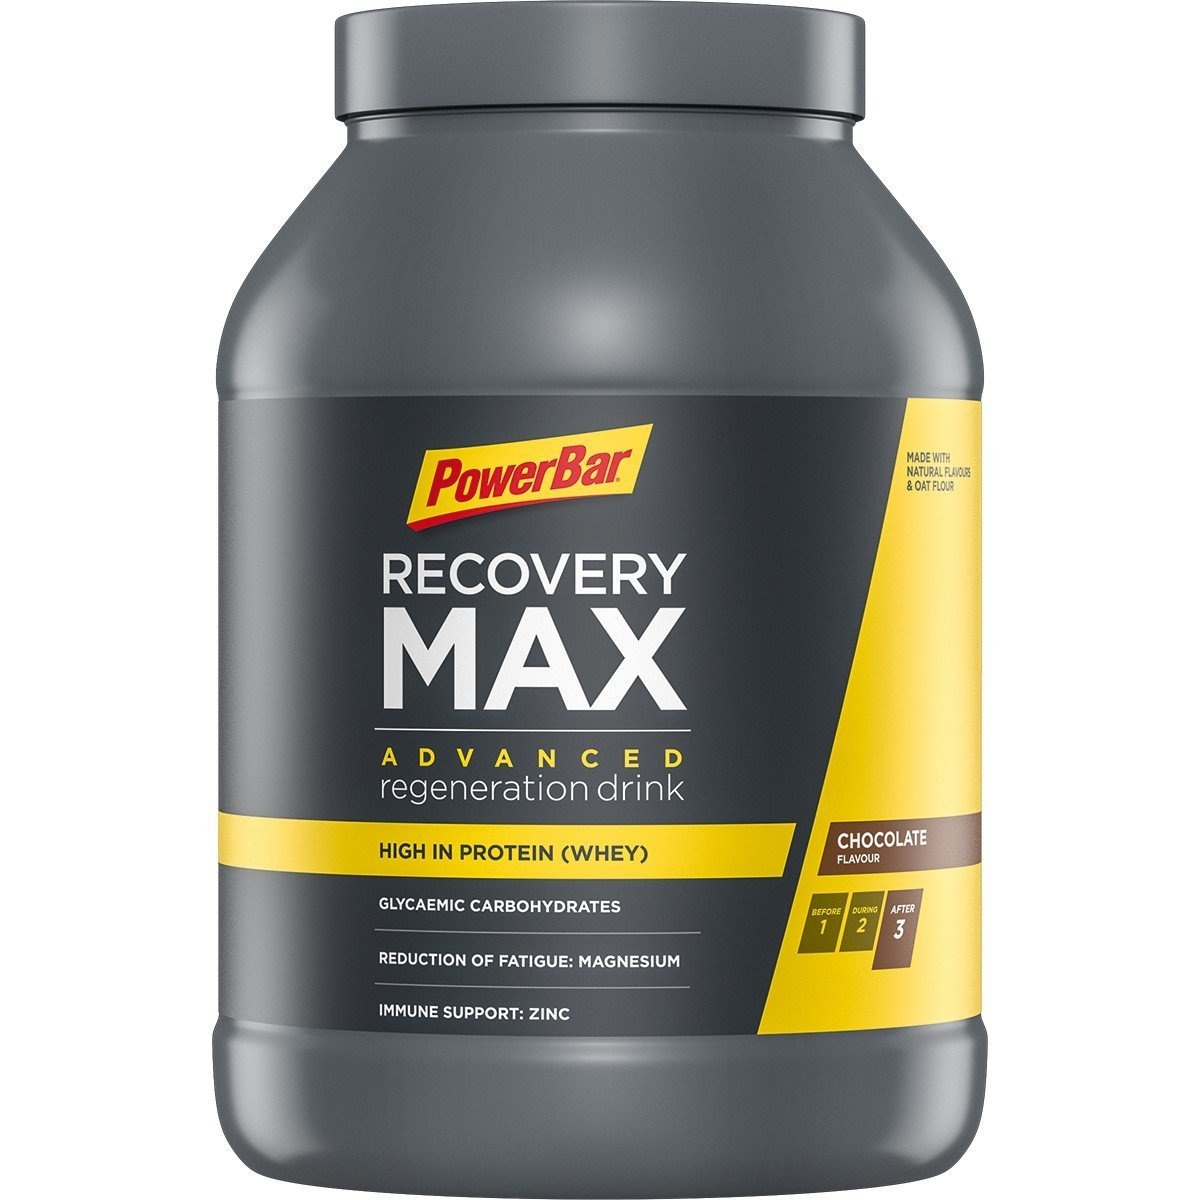 Tilbehør - Energiprodukter - Powerbar Recovery Max - Chocolate - 1144g